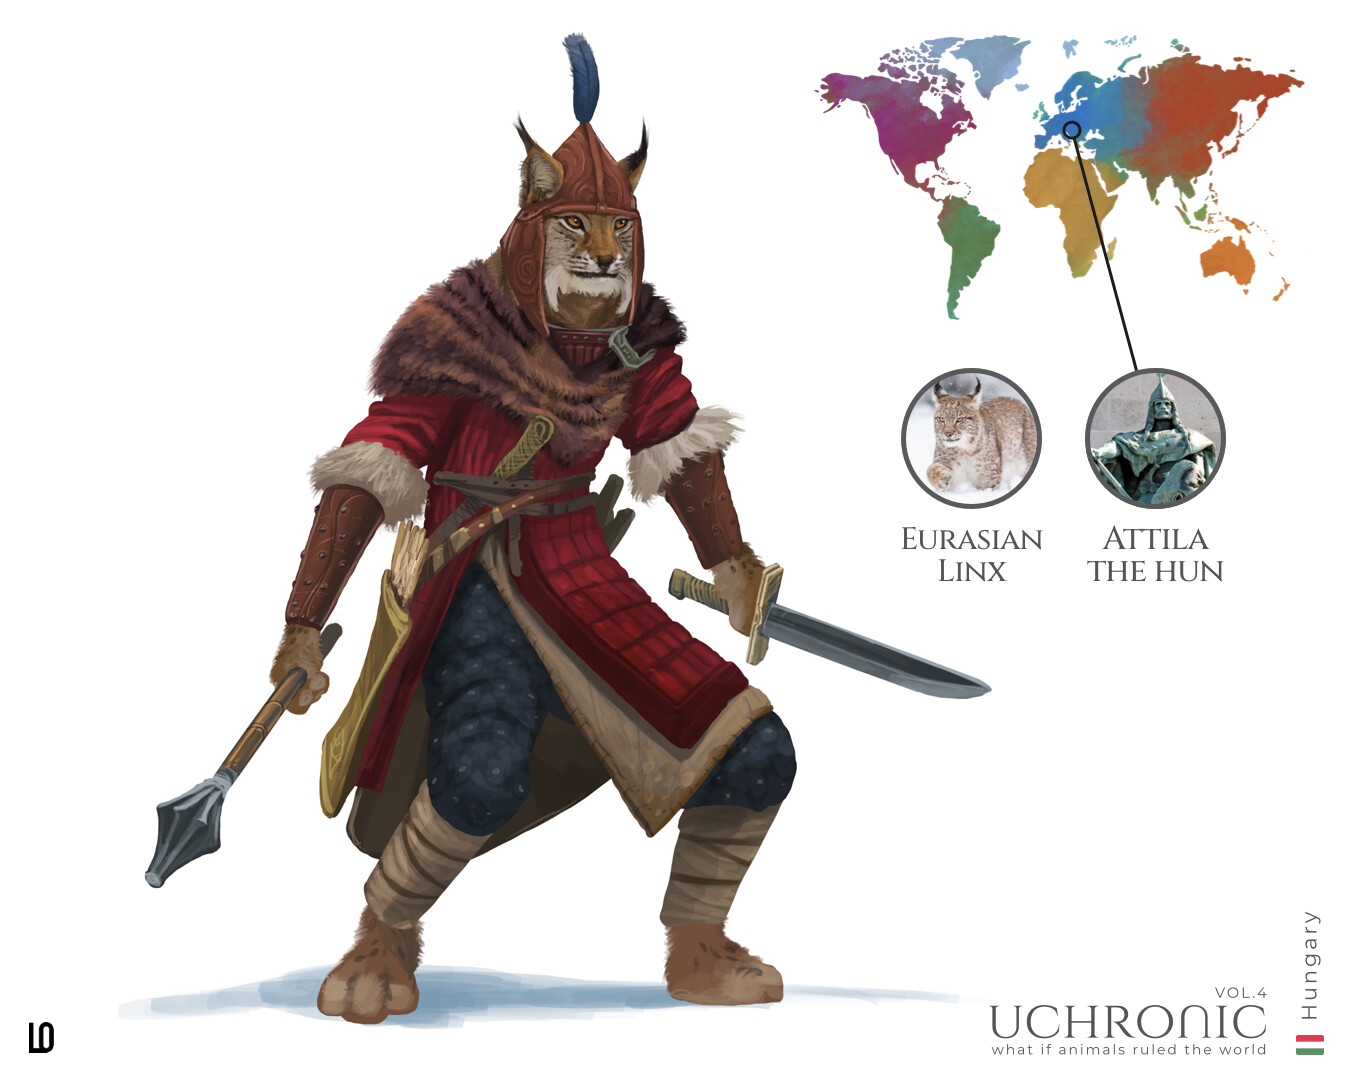 The famous Attila the Hun, I placed him in Hungary (no one has a precise clue about his origin, only his end…) with another majestic feline… the Eurasian Linx.